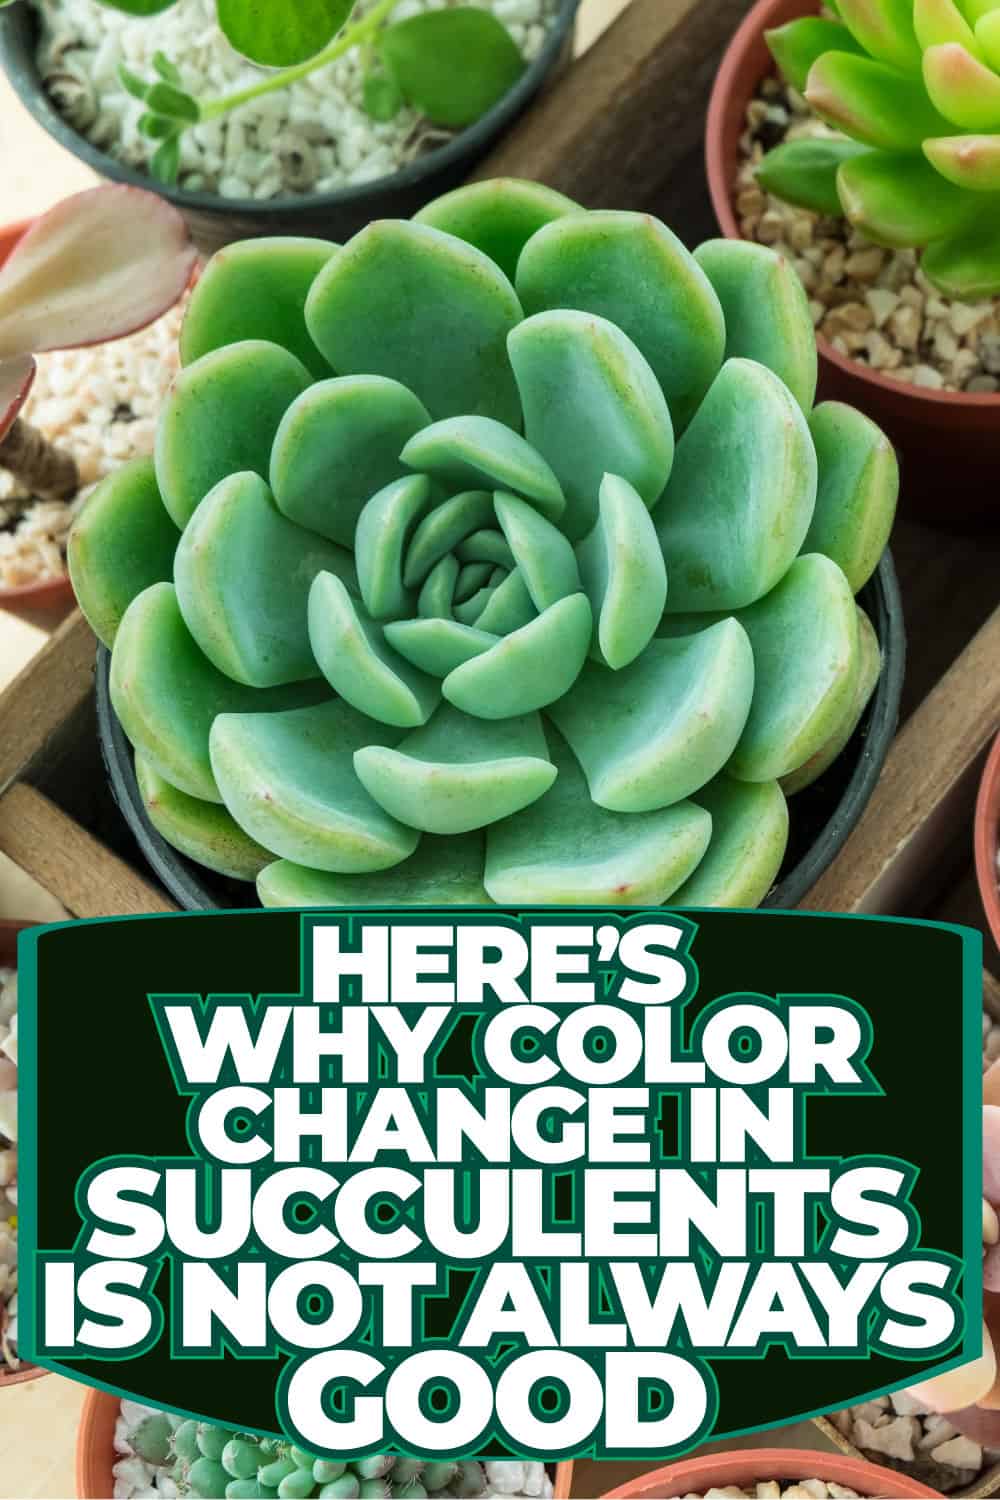 Here's Why Color Change In Succulents Is Not Always Good